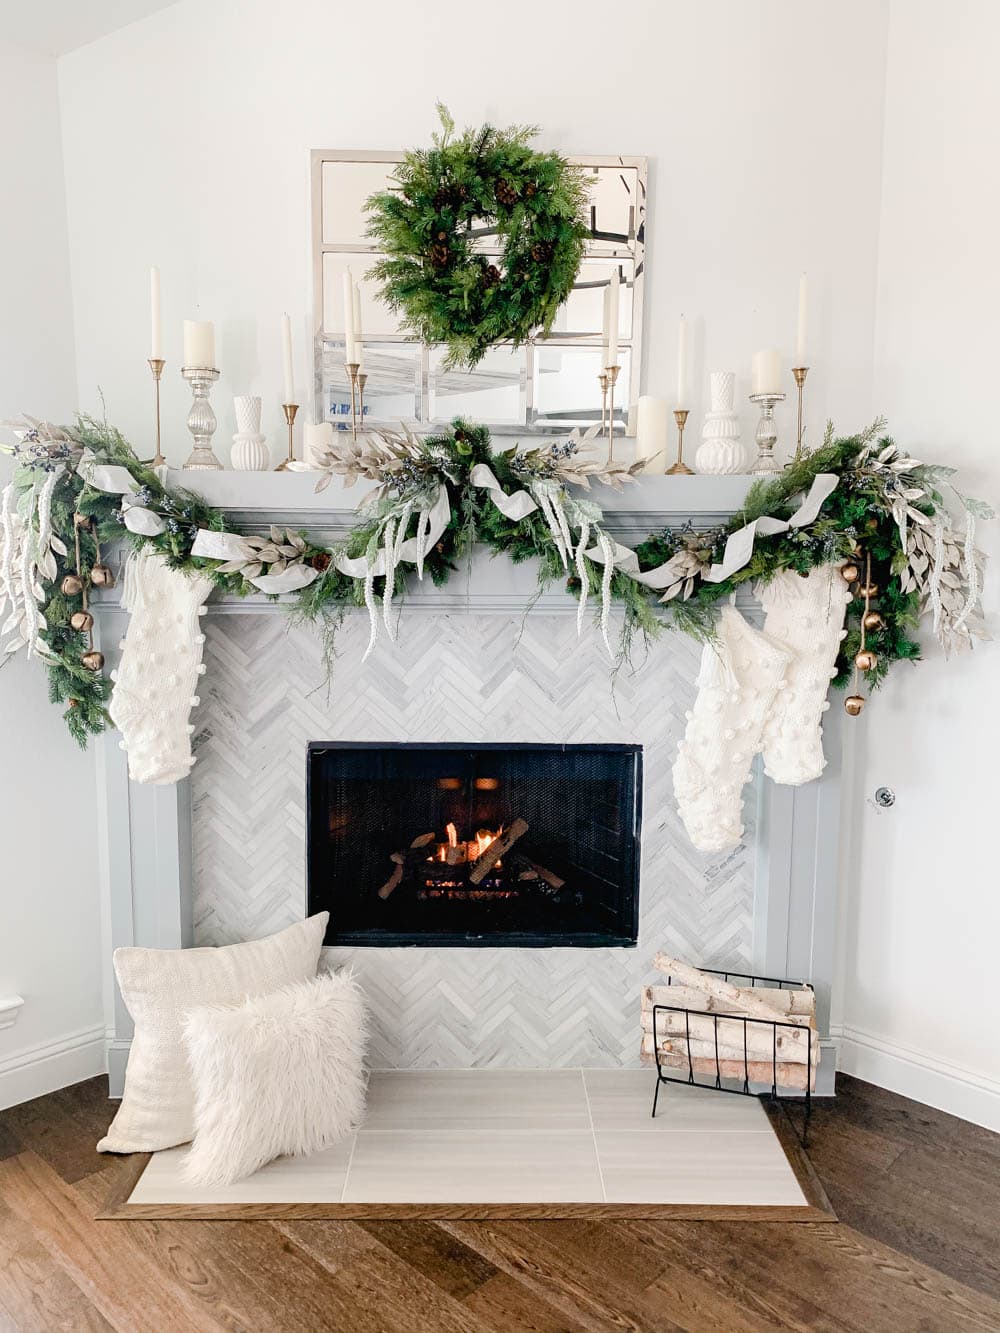 Use Wreaths on The Fireplace